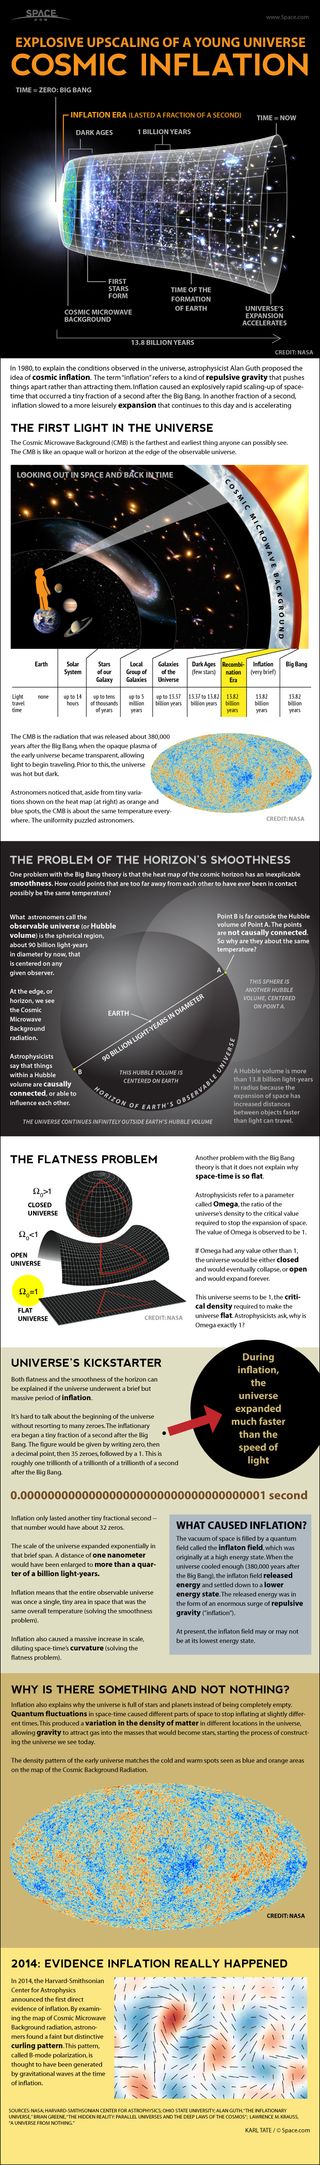 Inflation is the mysterious force that blew up the scale of the infant universe from sub-microscopic to gargantuan in a fraction of a second. See how cosmic inflation theory for the Big Bang and universe's expansion works in this Space.com infographic.